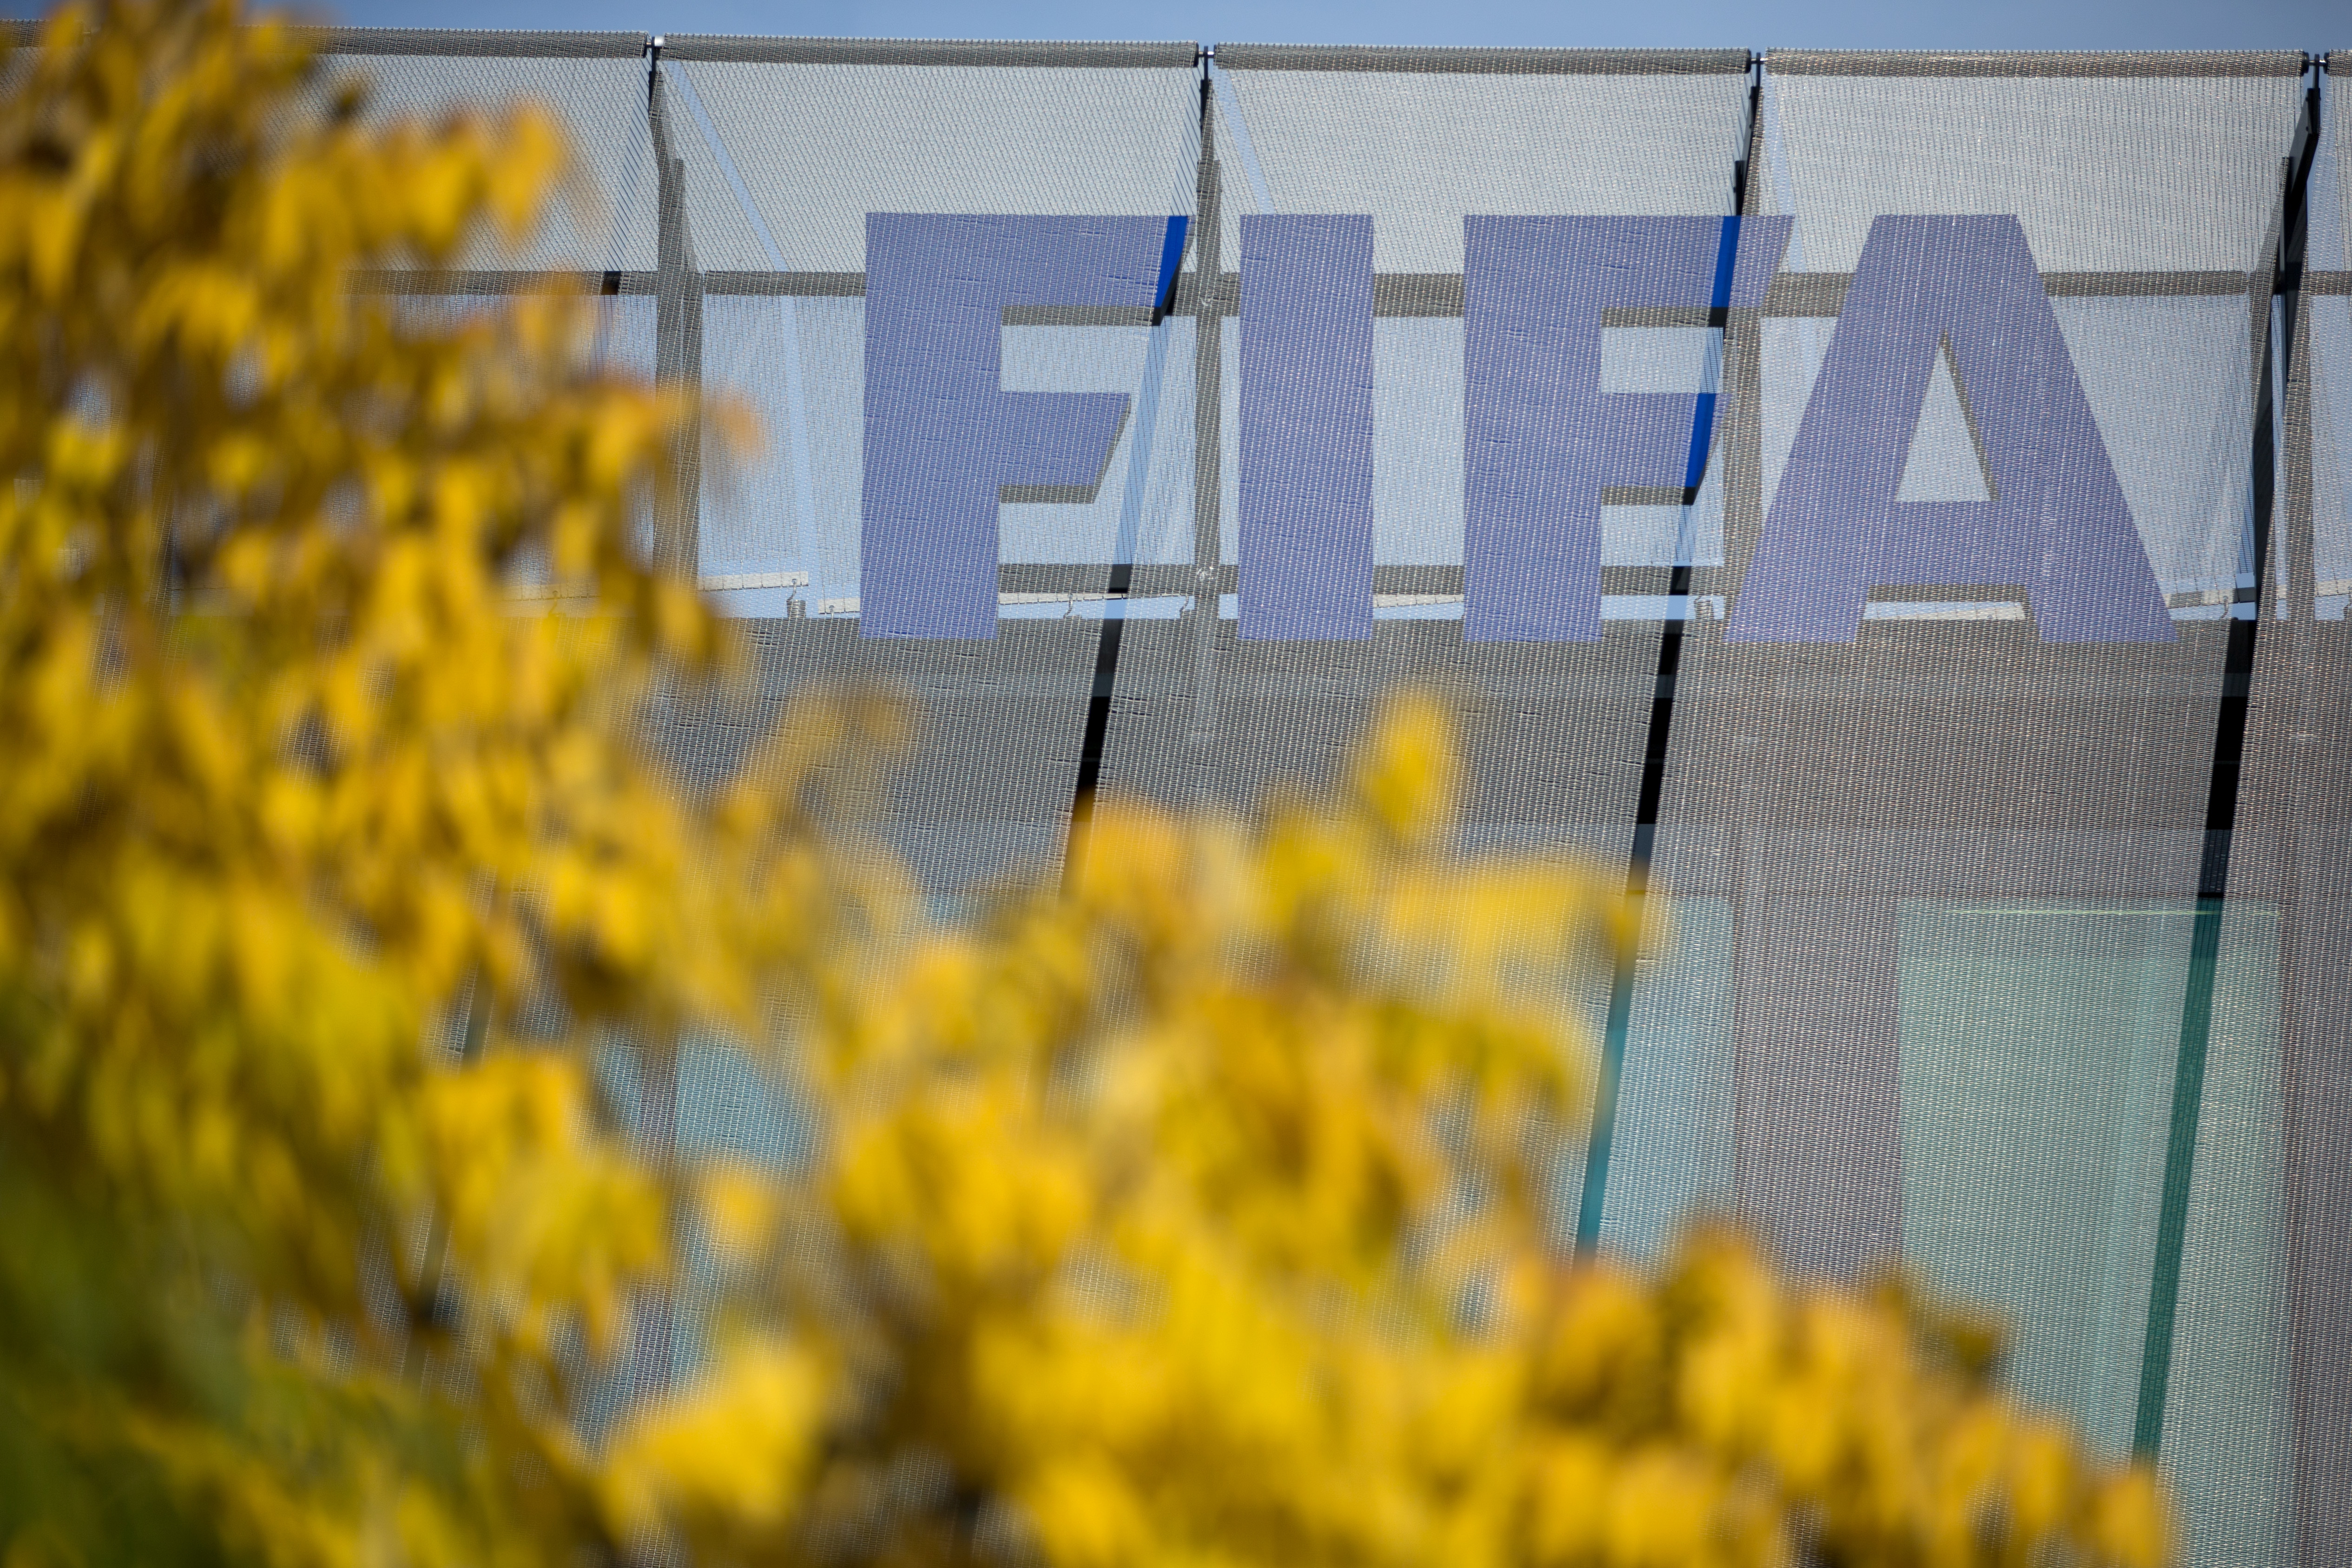 ZURICH, SWITZERLAND - SEPTEMBER 25: A FIFA logo sits on the rooftop at the FIFA headquarters on September 25, 2015 in Zurich, Switzerland. (Photo by Philipp Schmidli/Getty Images)